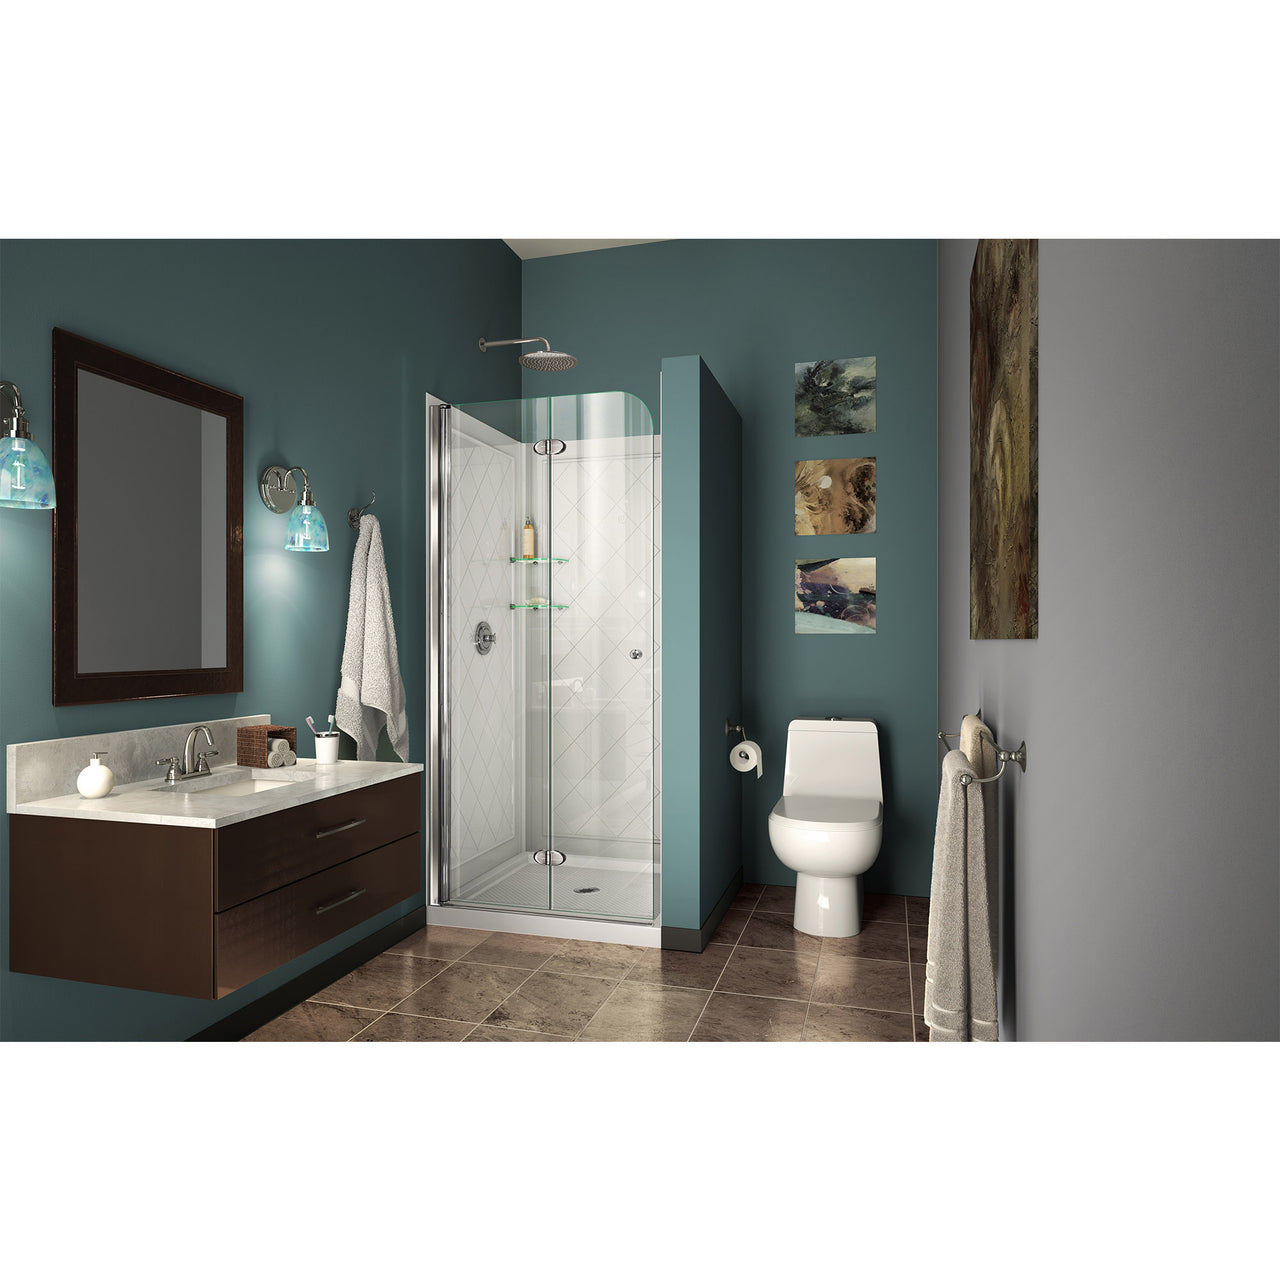 DreamLine Aqua Fold 36 in. D x 36 in. W x 76 3/4 in. H Frameless Bi-Fold Shower Door with Shower Base and QWALL-5 Shower Backwalls Kit - BNGBath